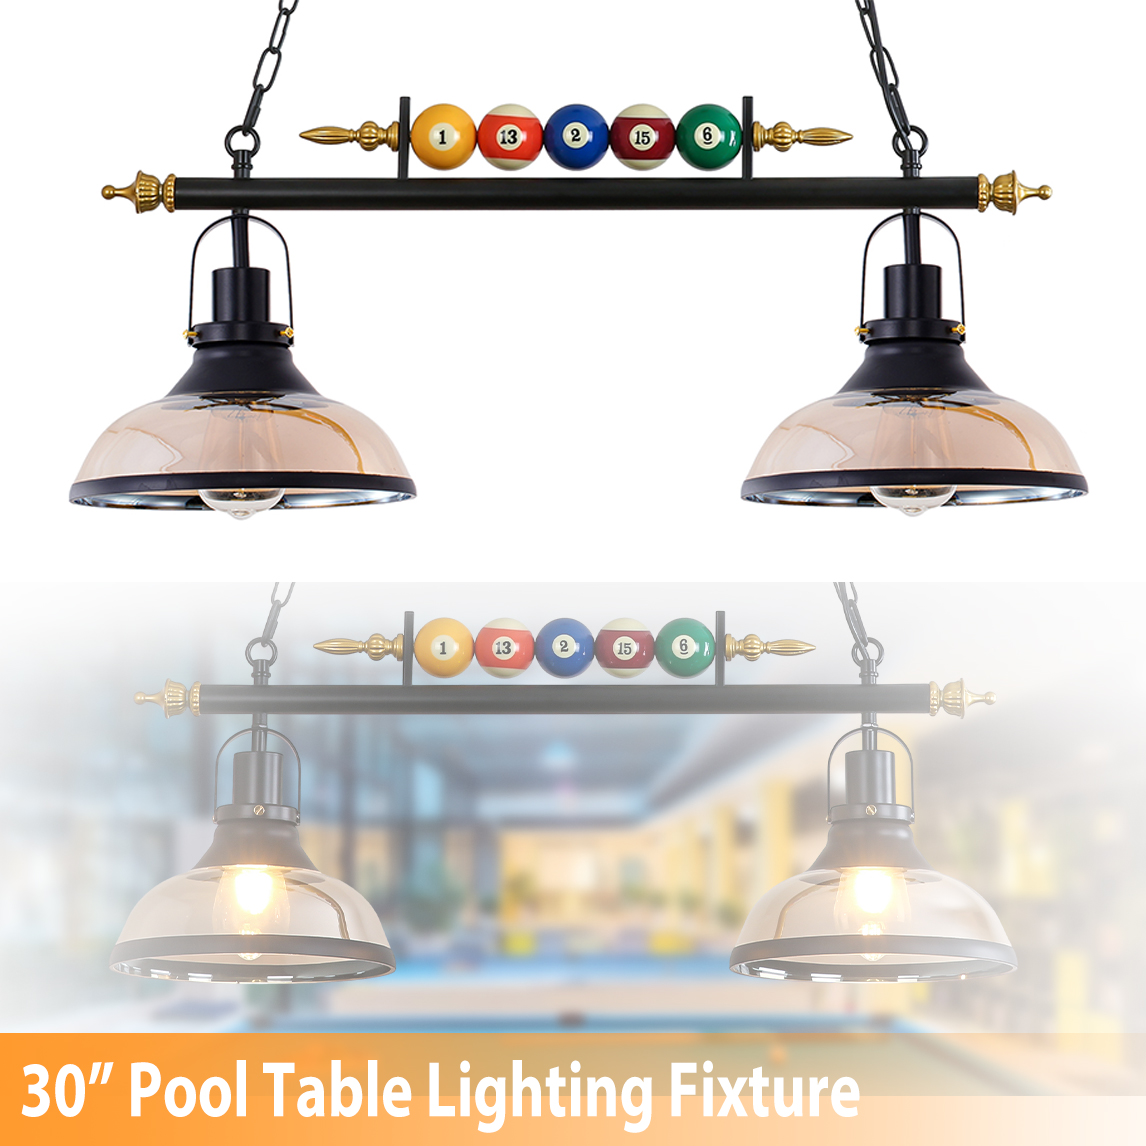 iMeshbean Pool Table Lighting Fixtures Ceiling Lamp for Game Room Beer Party , Real Billiard Ball Design Billiard Pendant Lamp with 2 Glass Shades - image 1 of 10